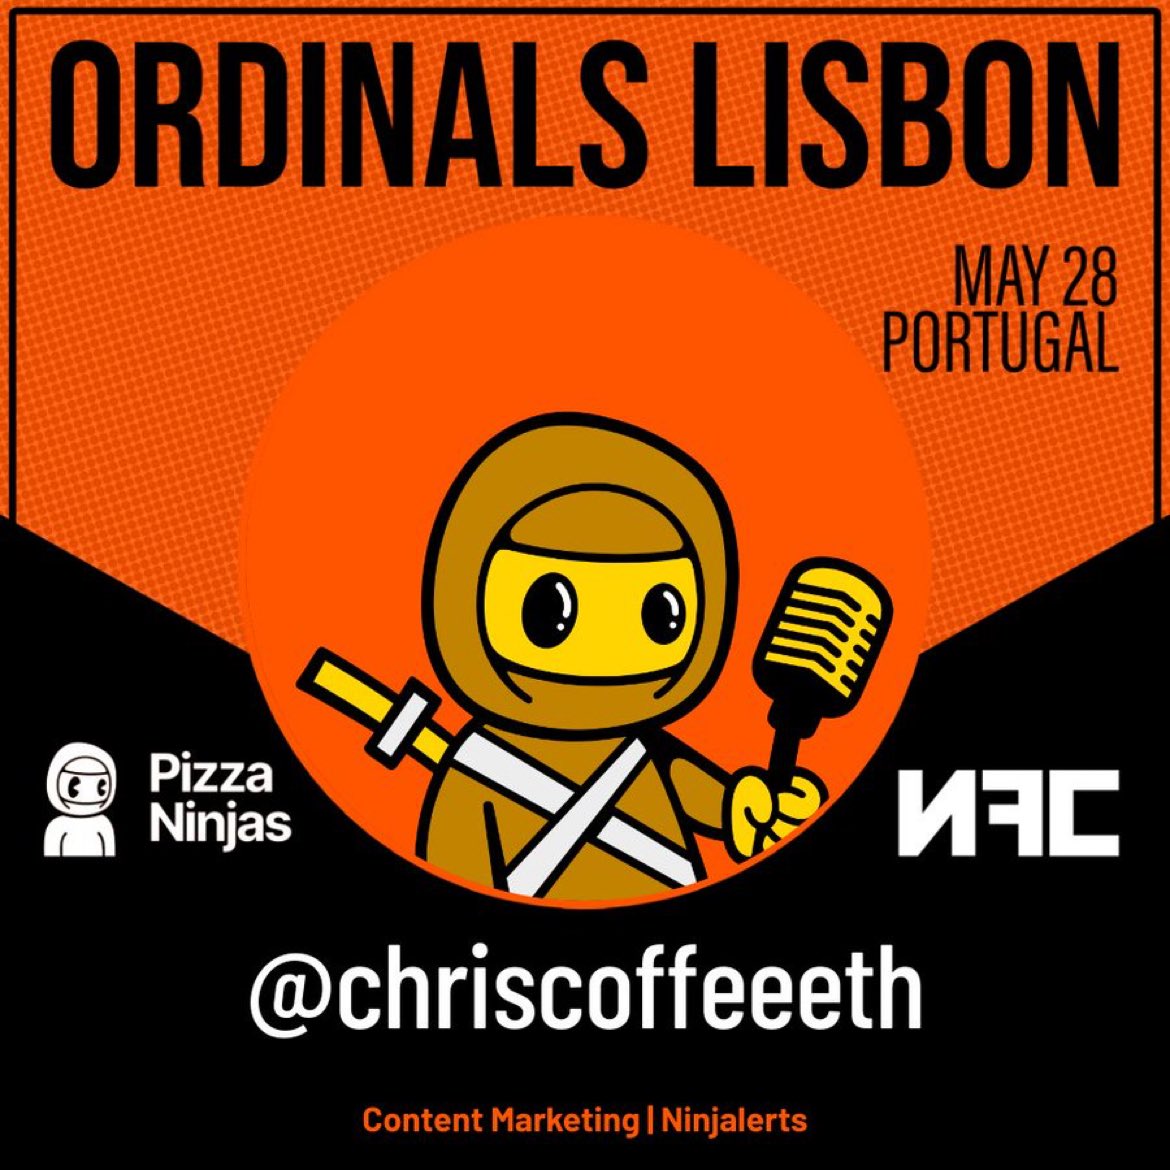 Gm, your boy will be speaking at Ordinals Lisbon May 28th! 🫡 

I’m also helping run the conference so if you’re interested in attending or being involved let me know!